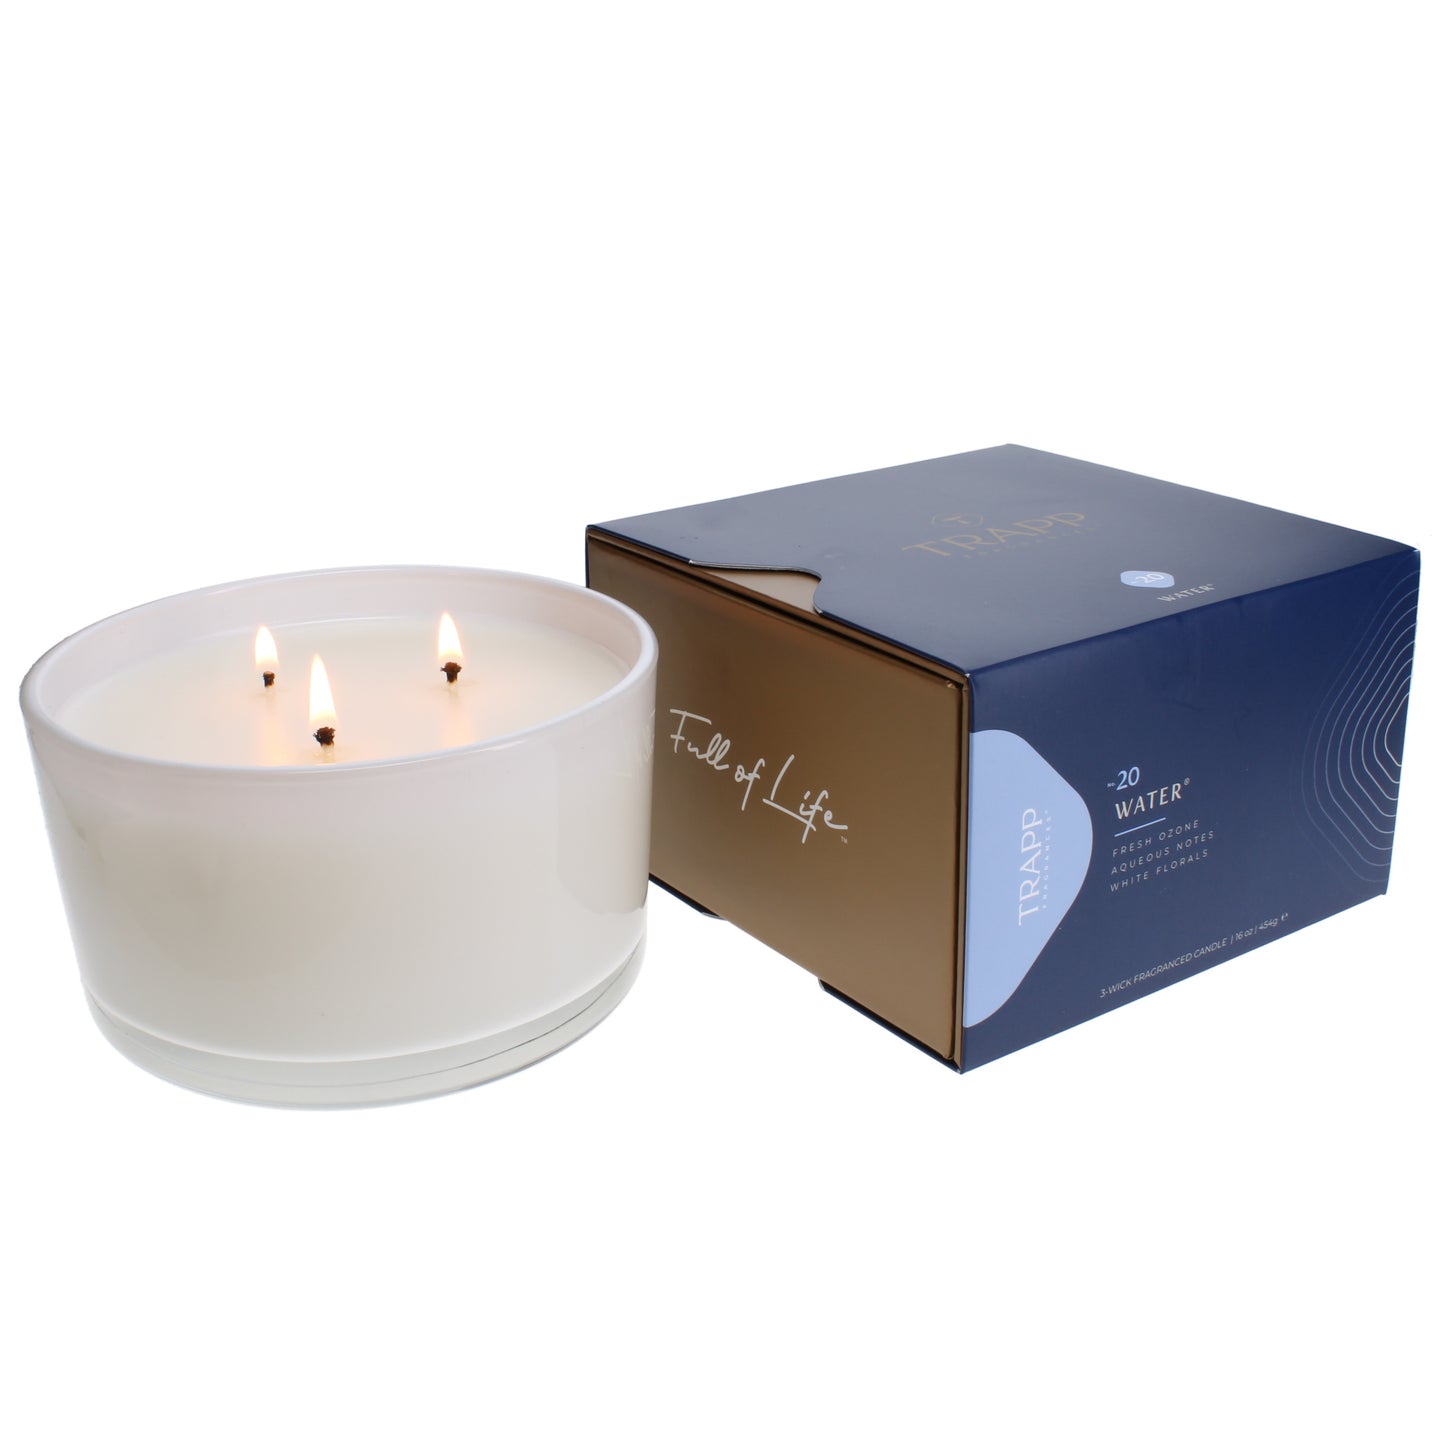 No. 20 Water 16 oz. 3-Wick Candle Image 2